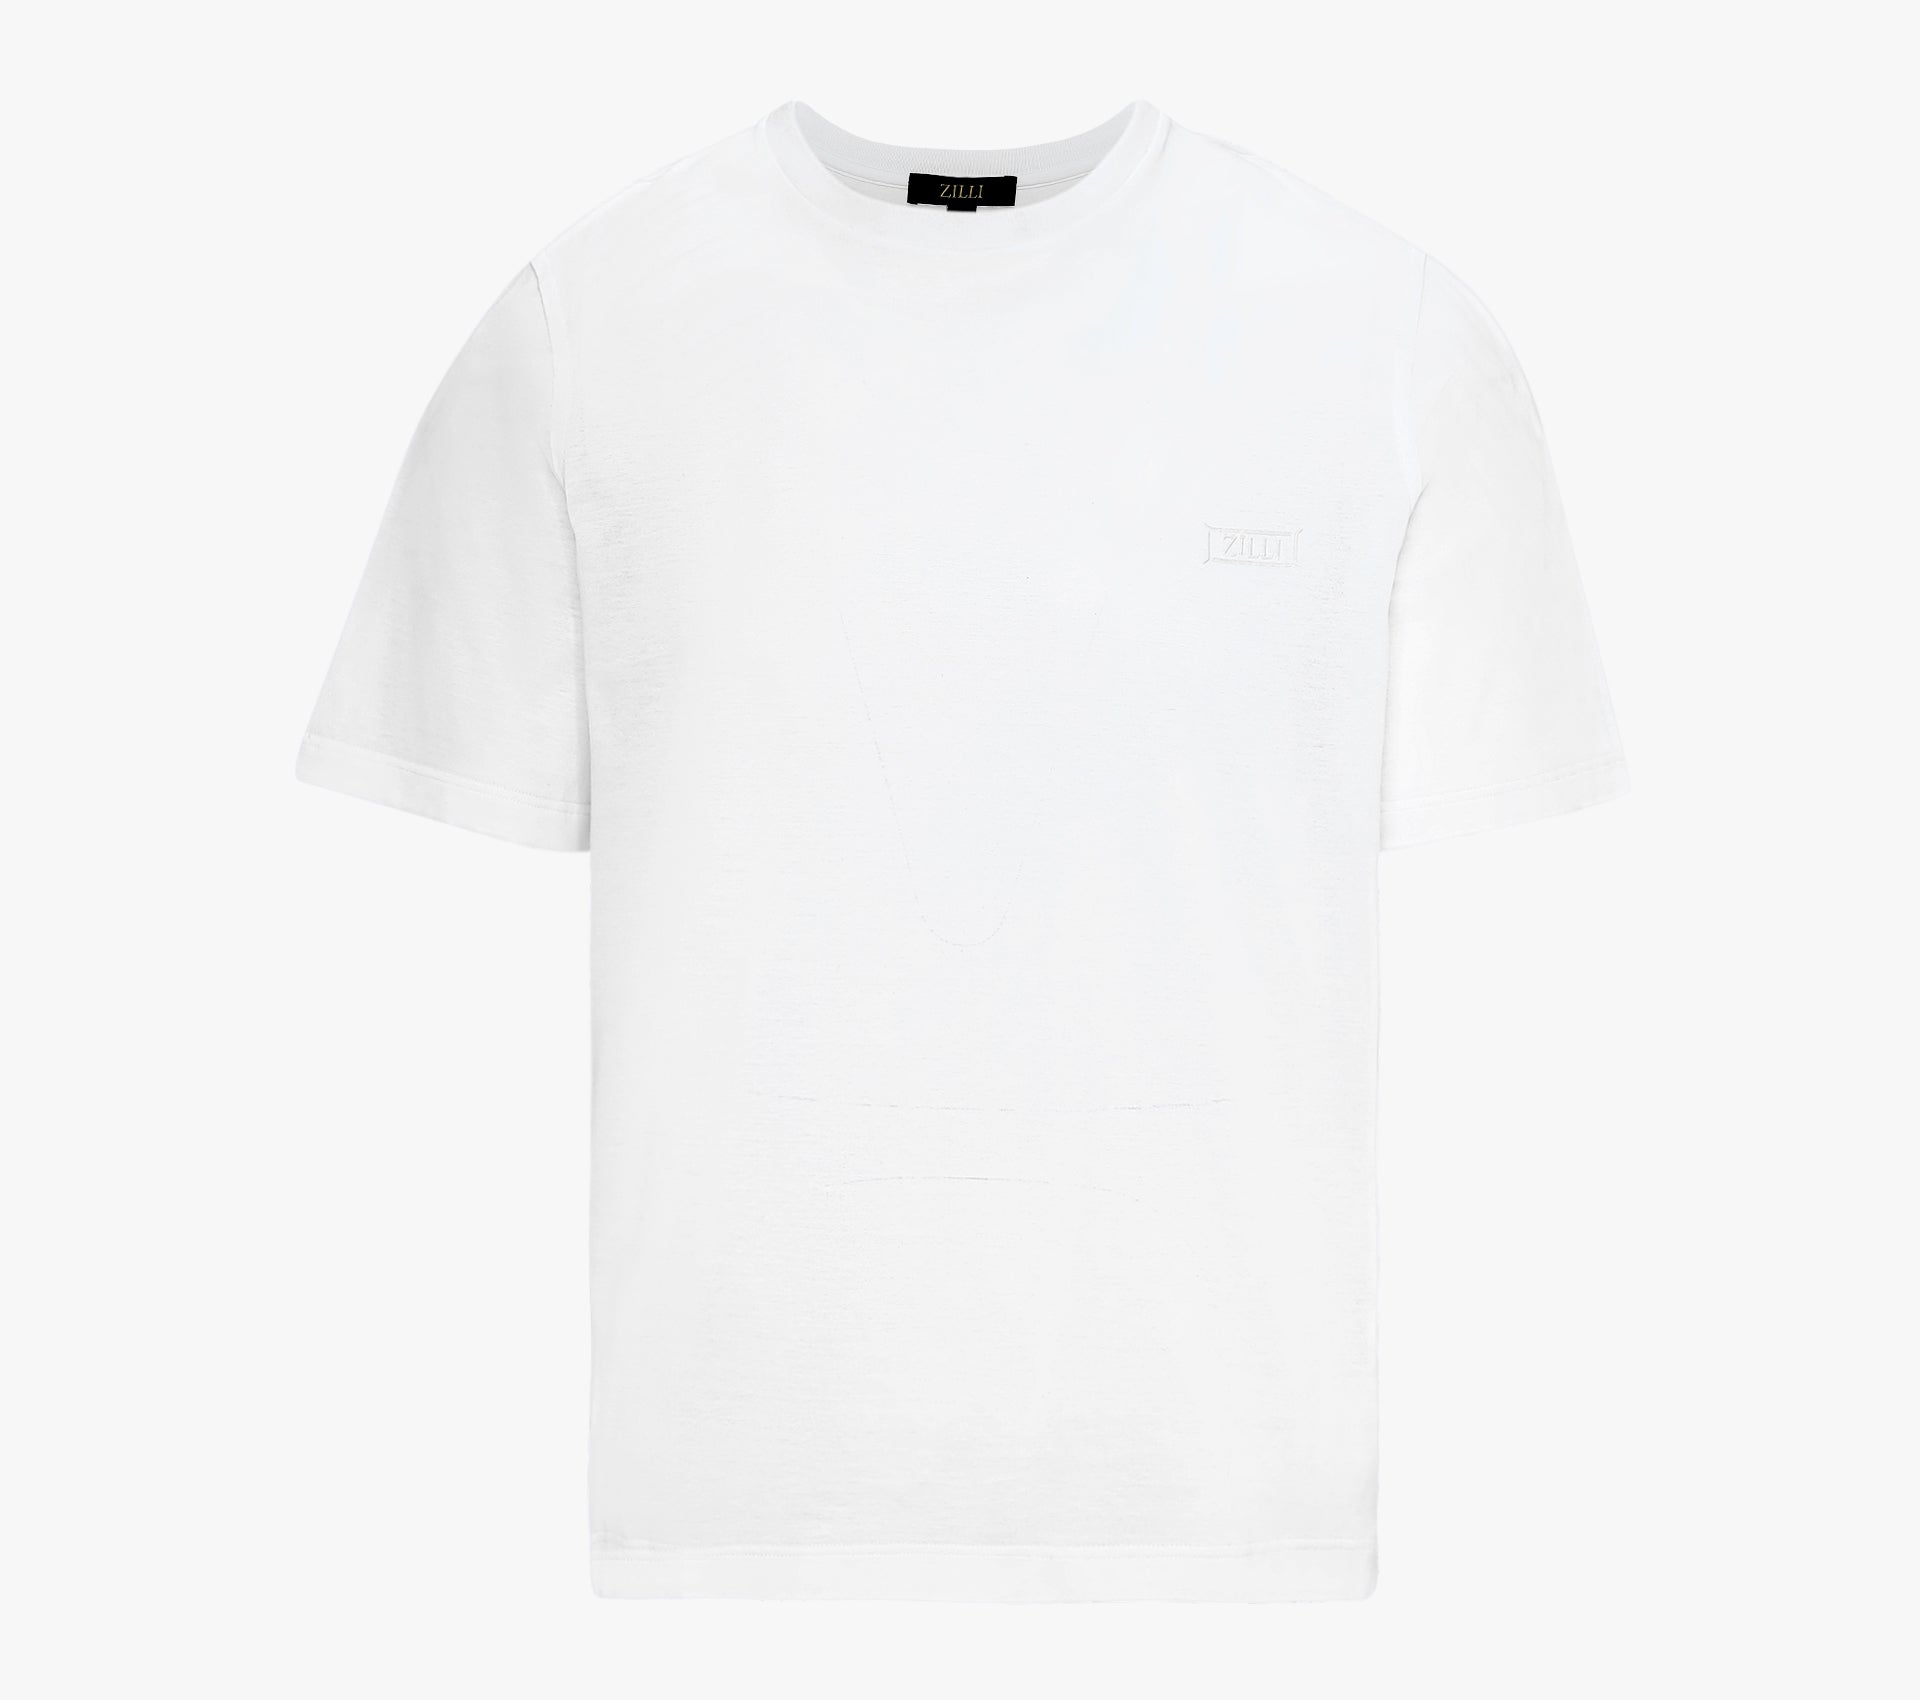 Cotton Round Neck Shirt with Micro Framed Zilli Lettering